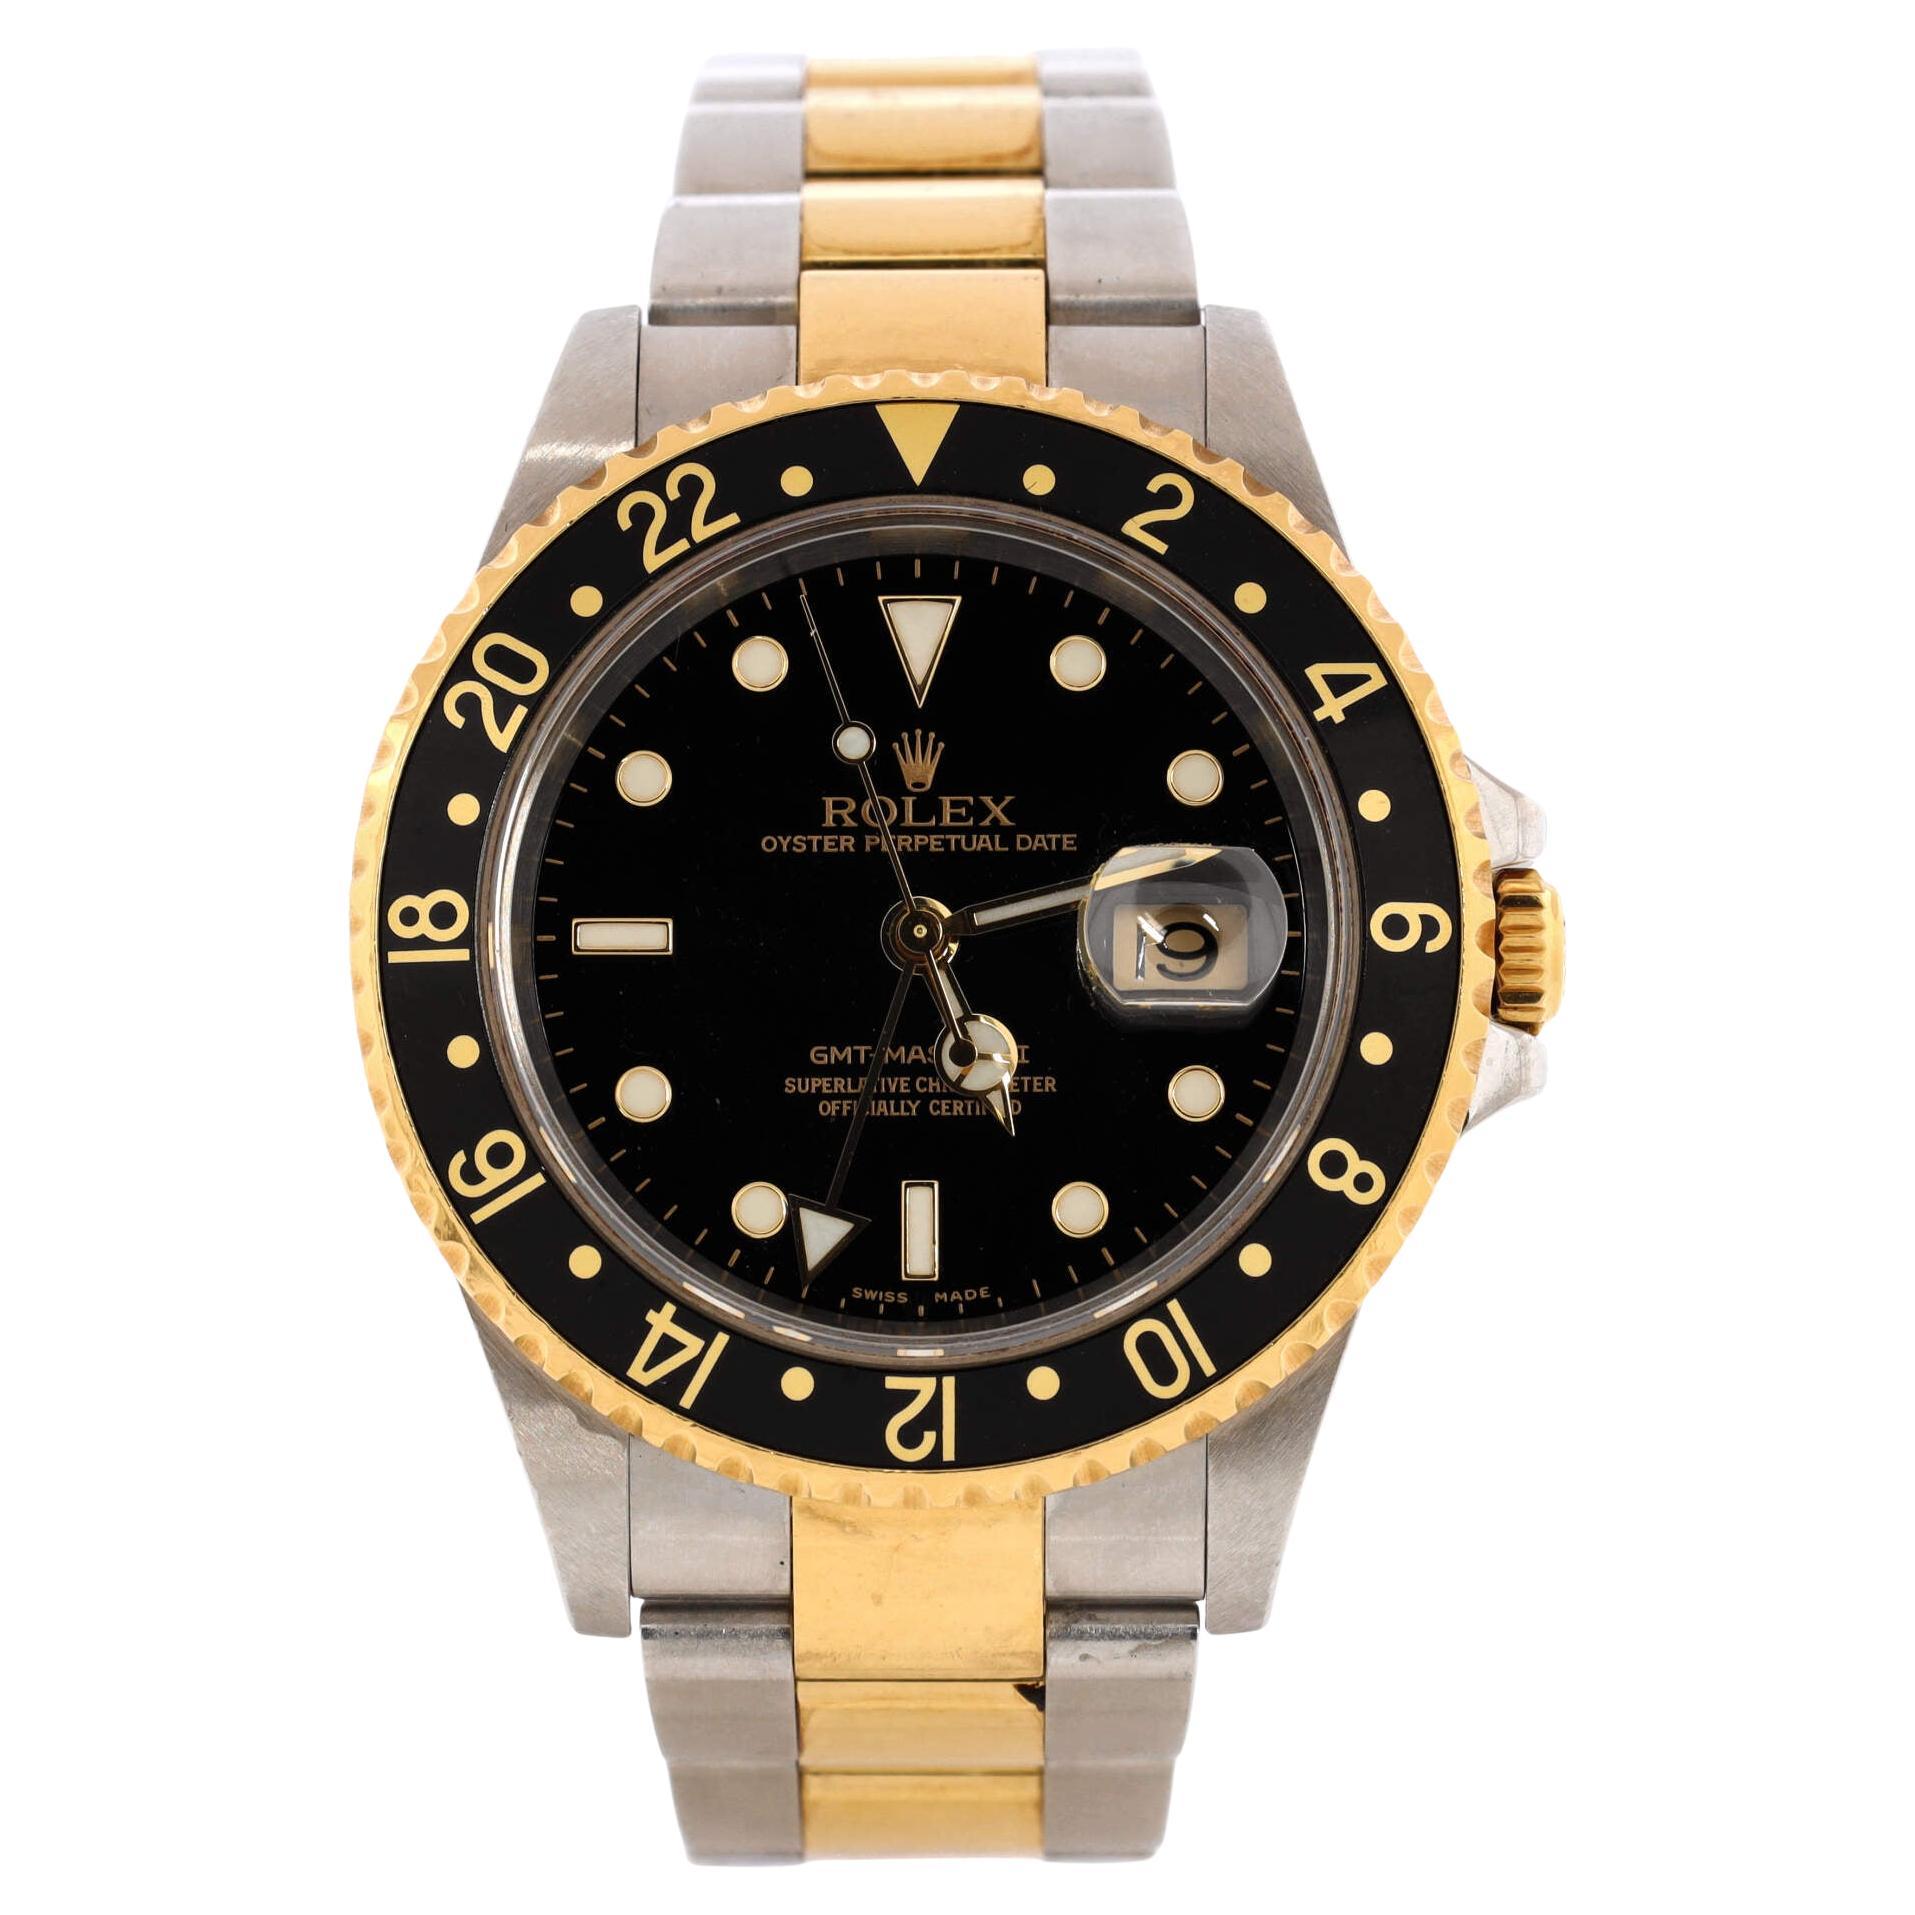 Rolex Oyster Perpetual Date GMT-Master II Automatic Watch Stainless Steel For Sale